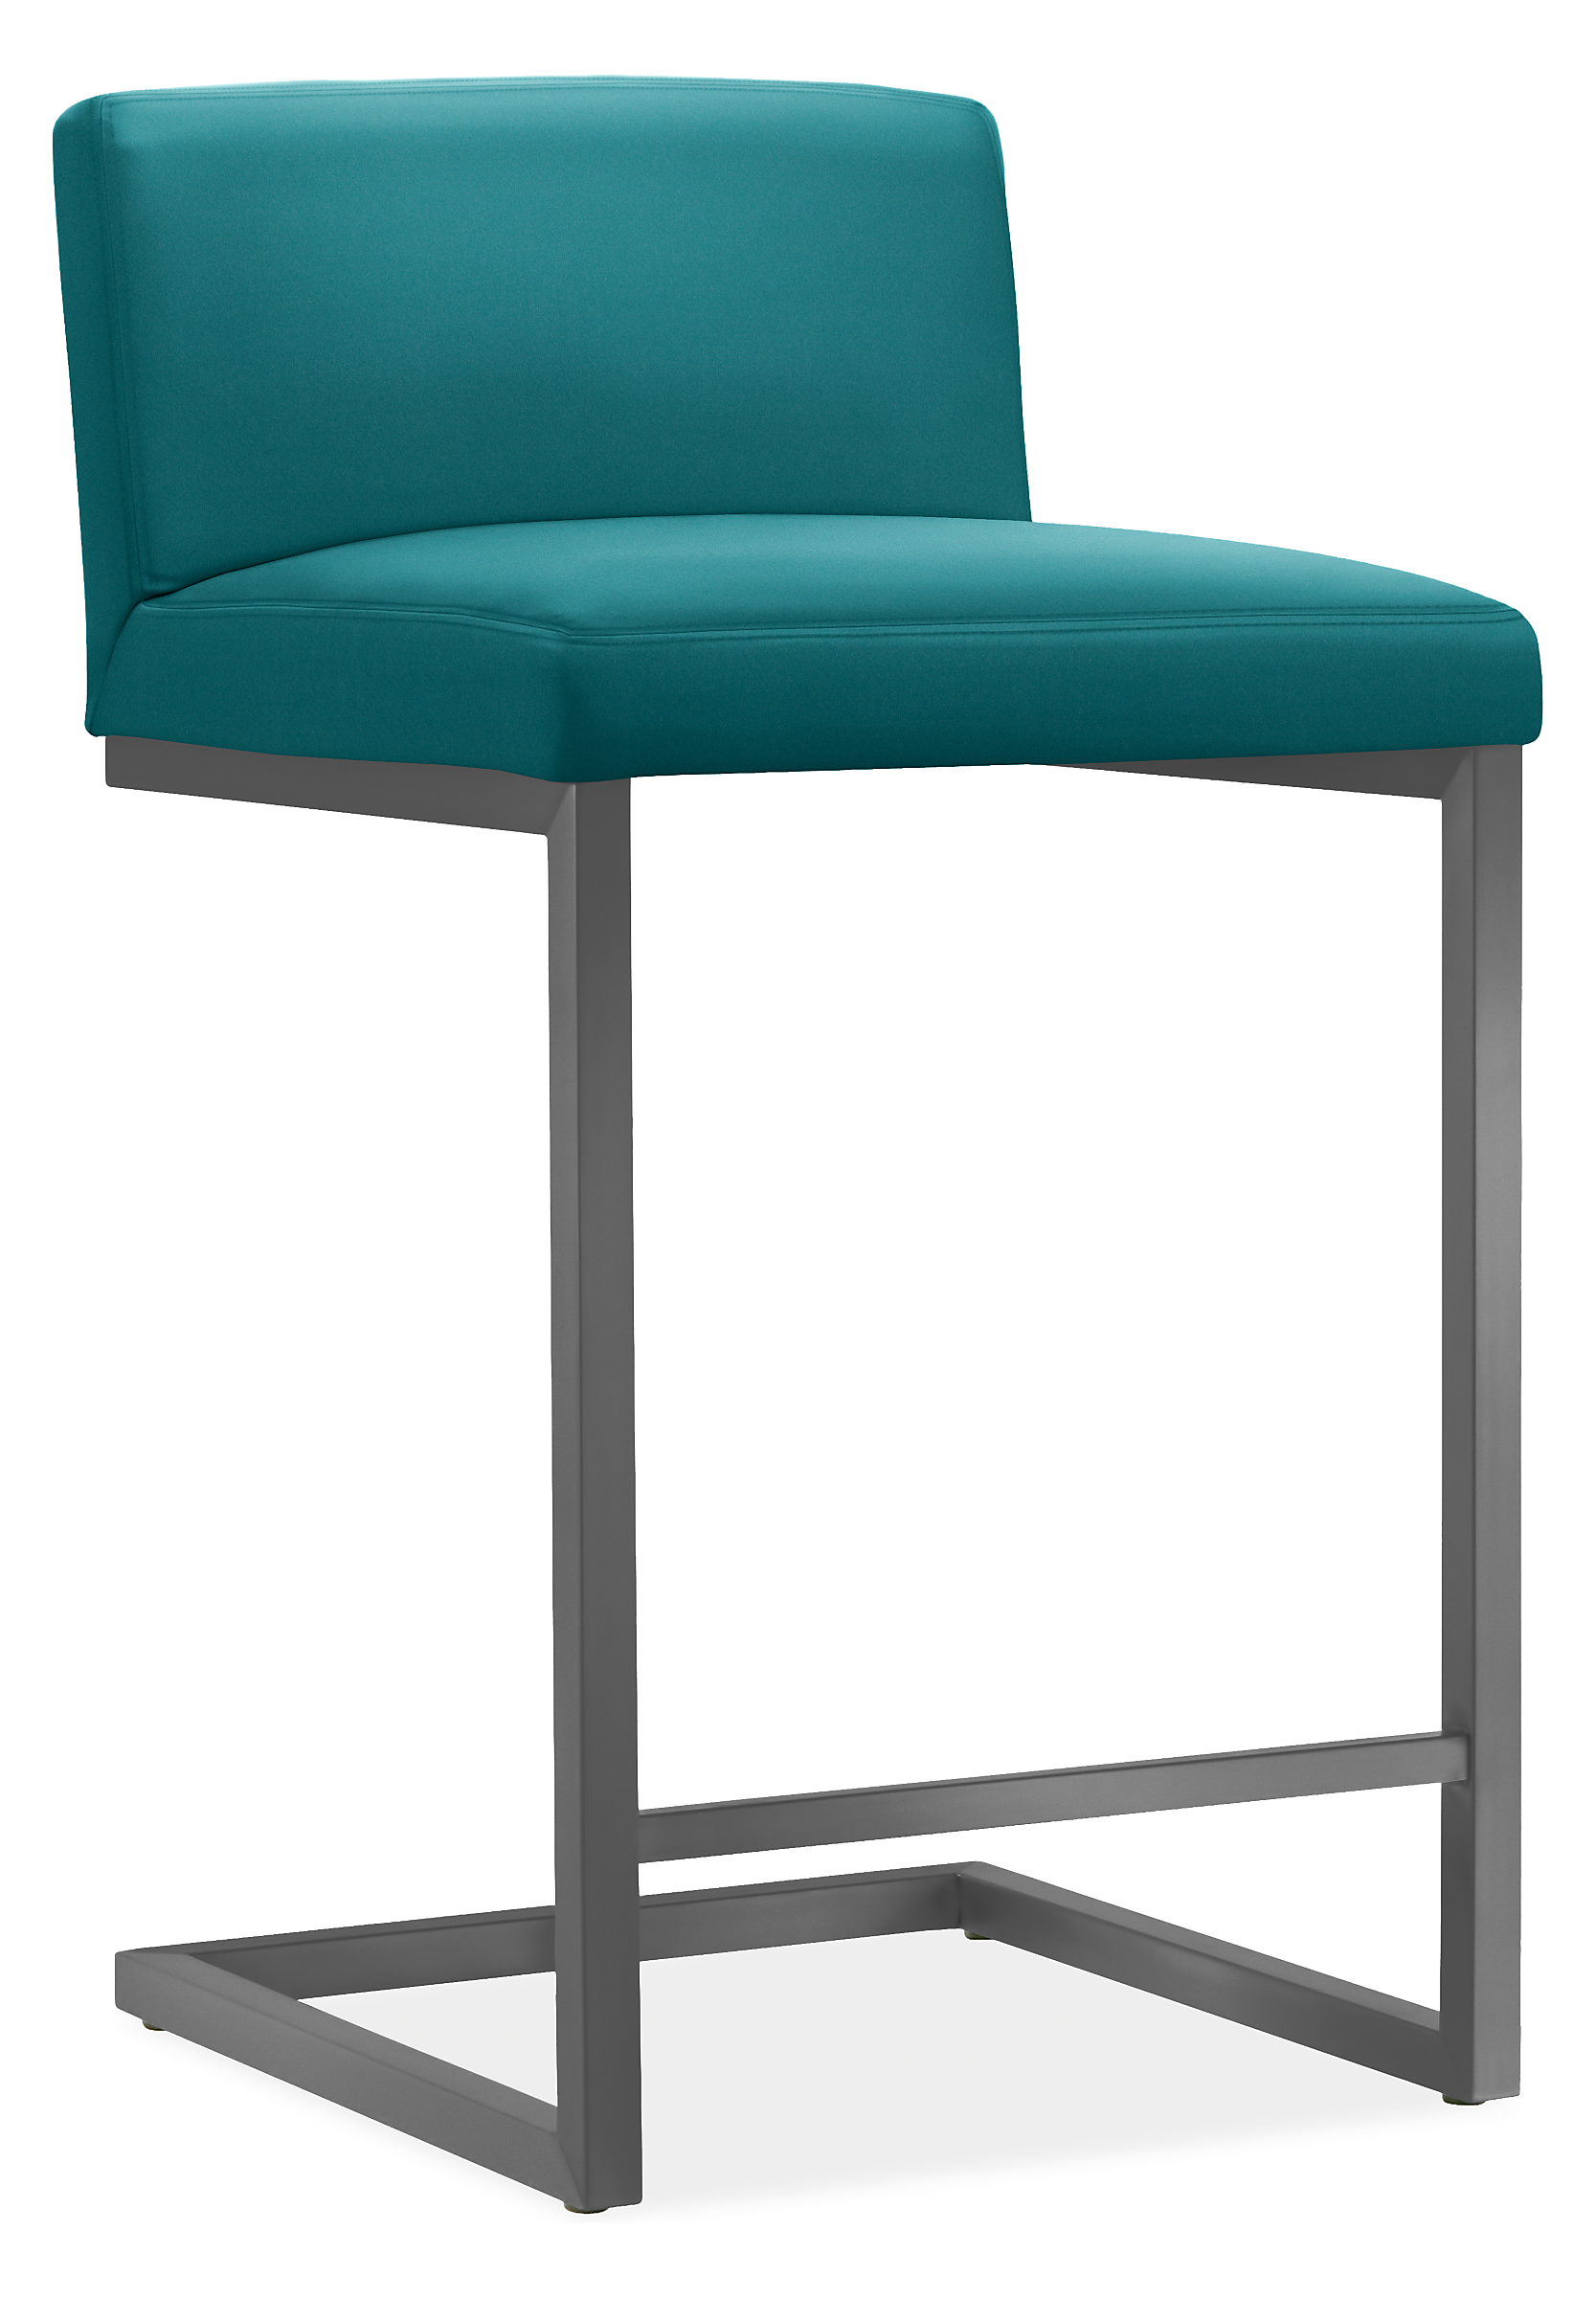 Finn Counter Stool in Tristan Teal with Graphite Frame